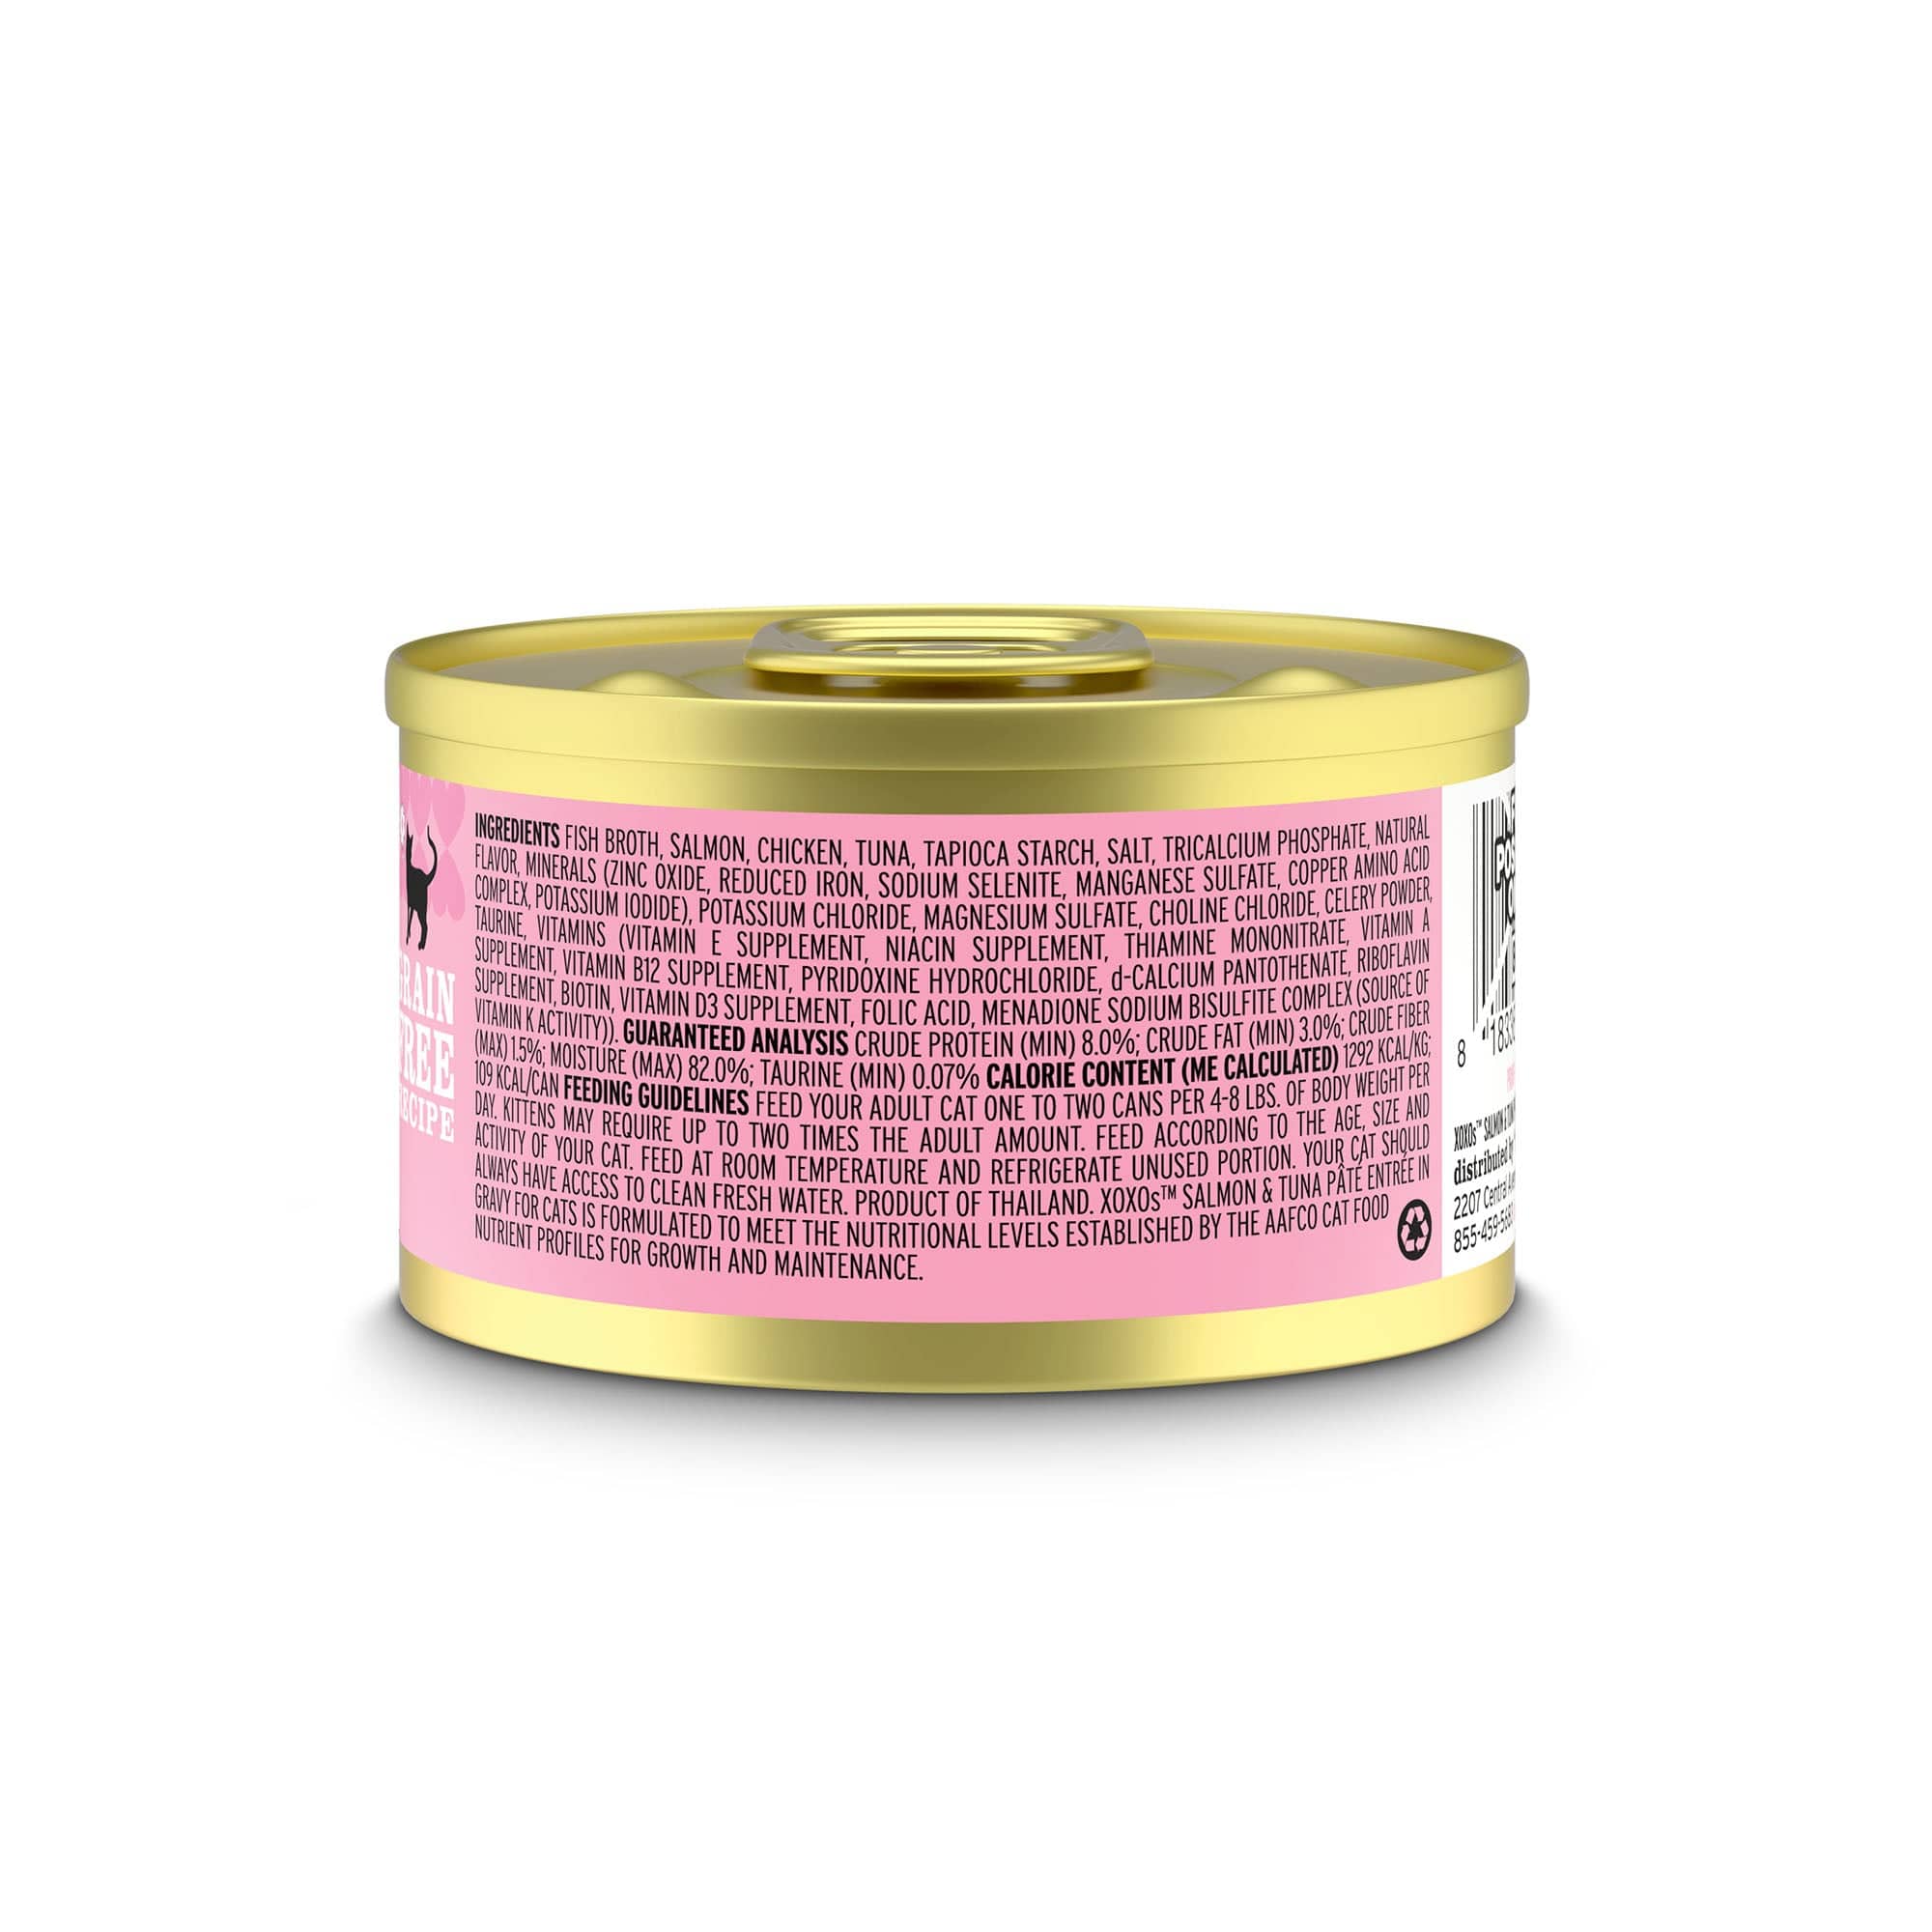 A close-up of a can of XOXOs Salmon & Tuna Pate with a label.